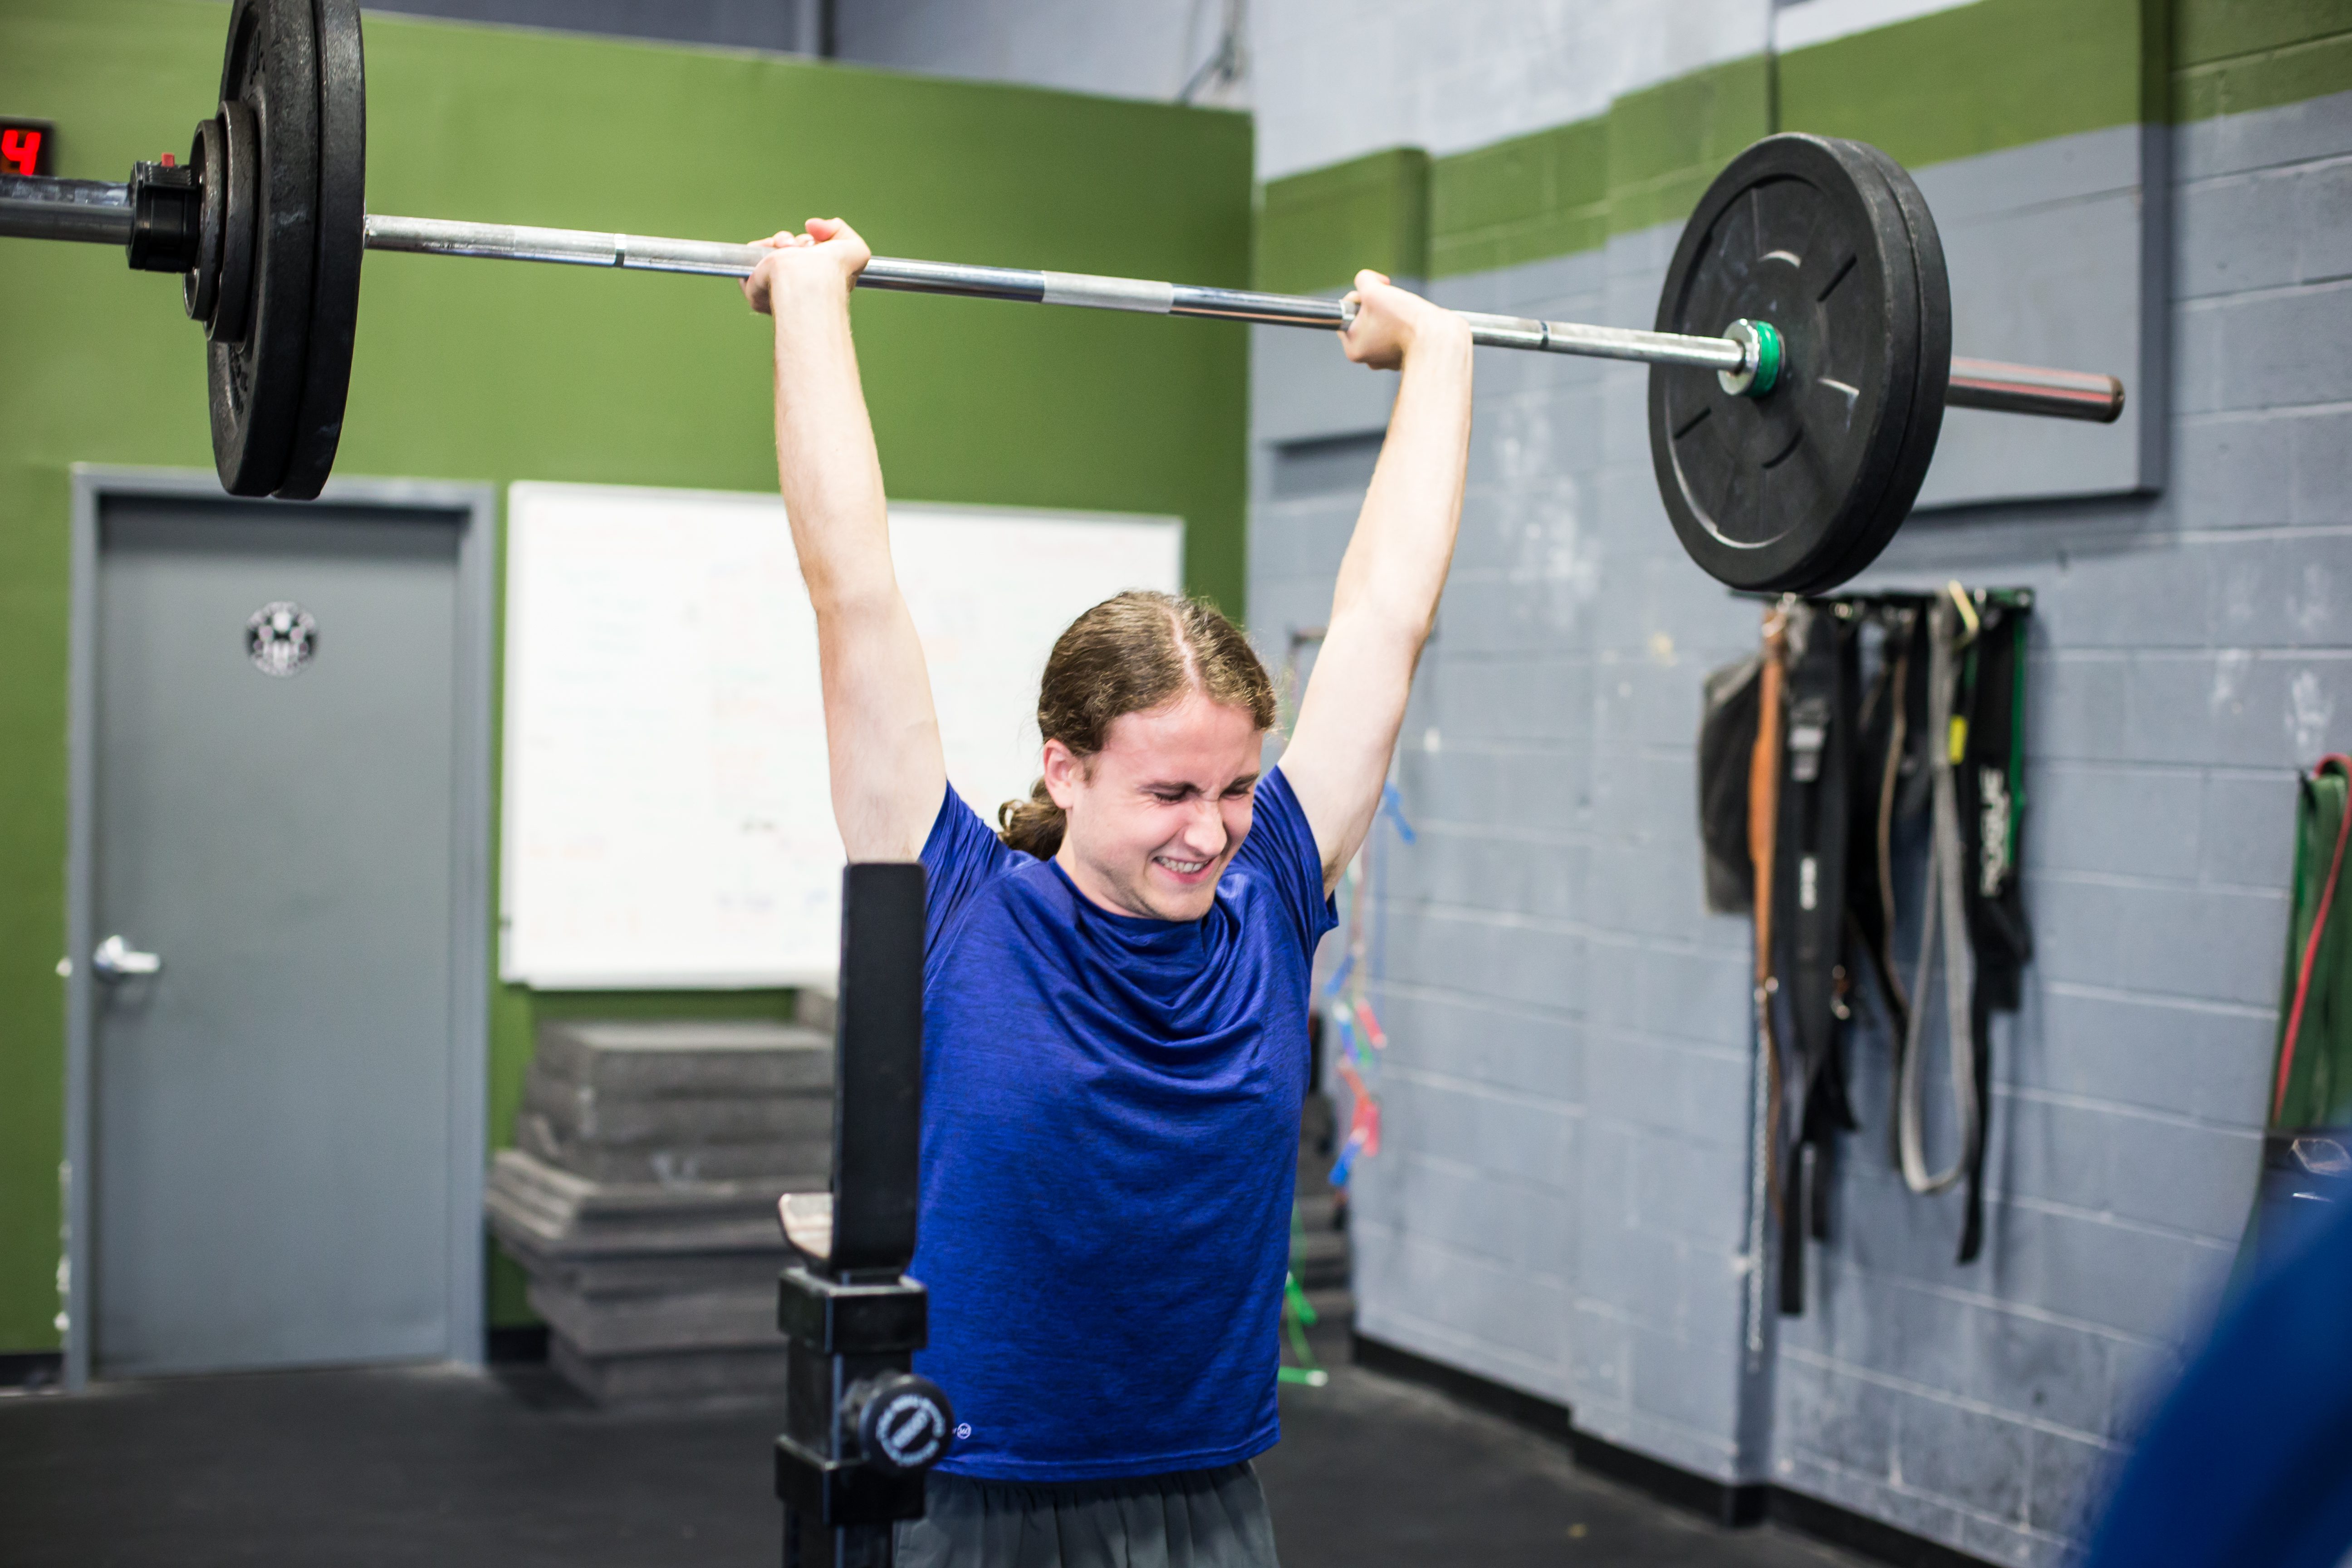 Tuesday 7.24.18 CrossFit